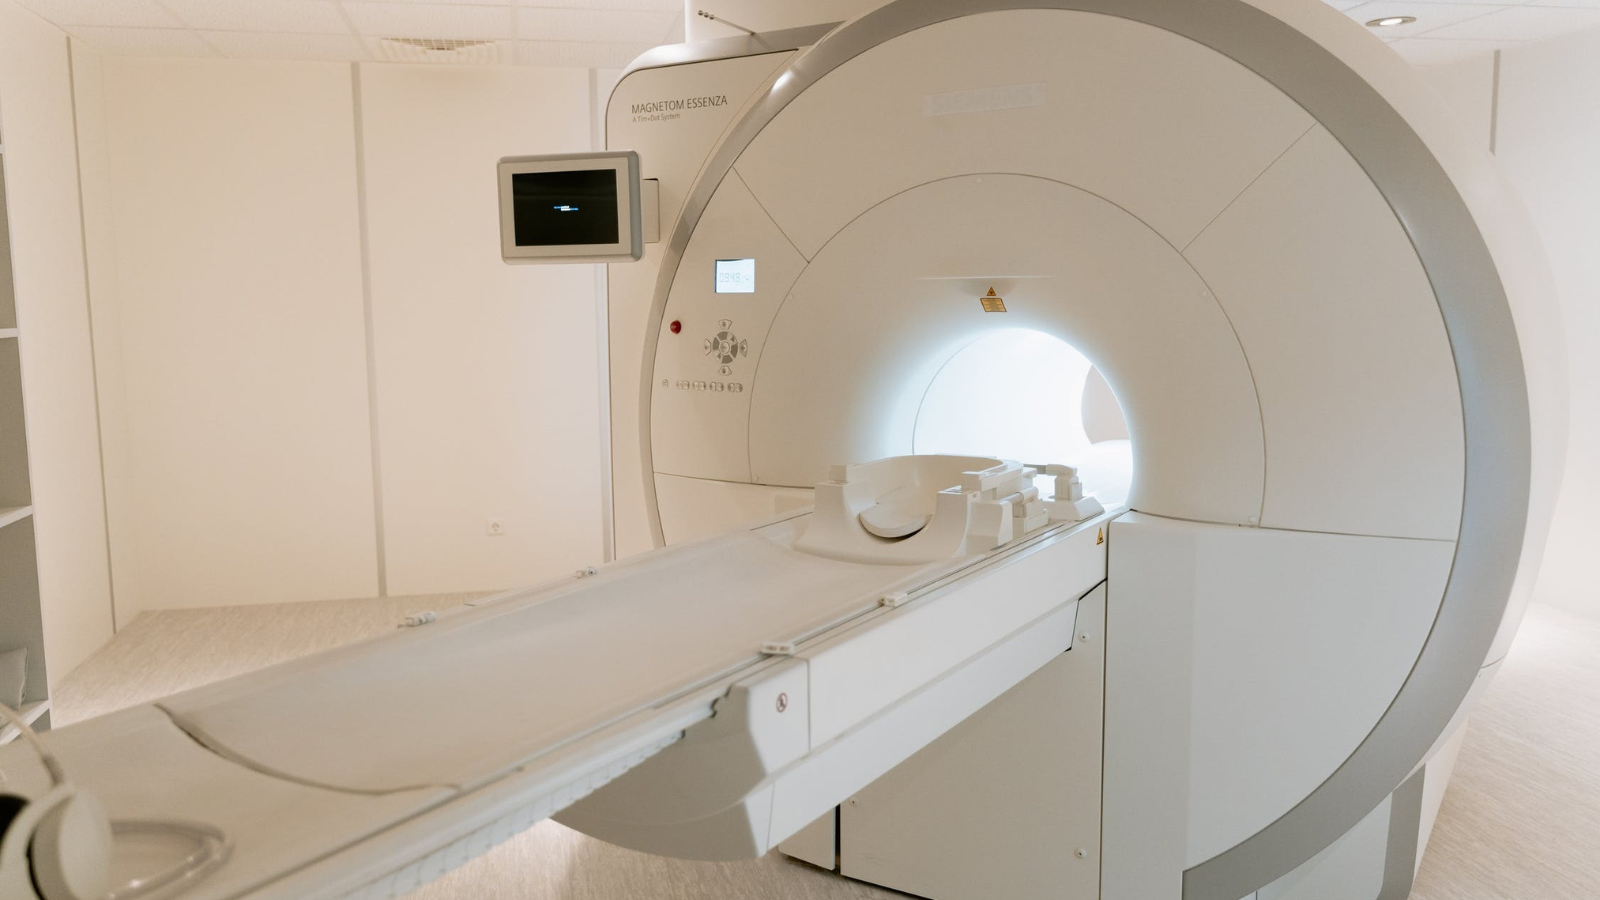 The Role of CT Scans in Cancer Detection } Echelon Health